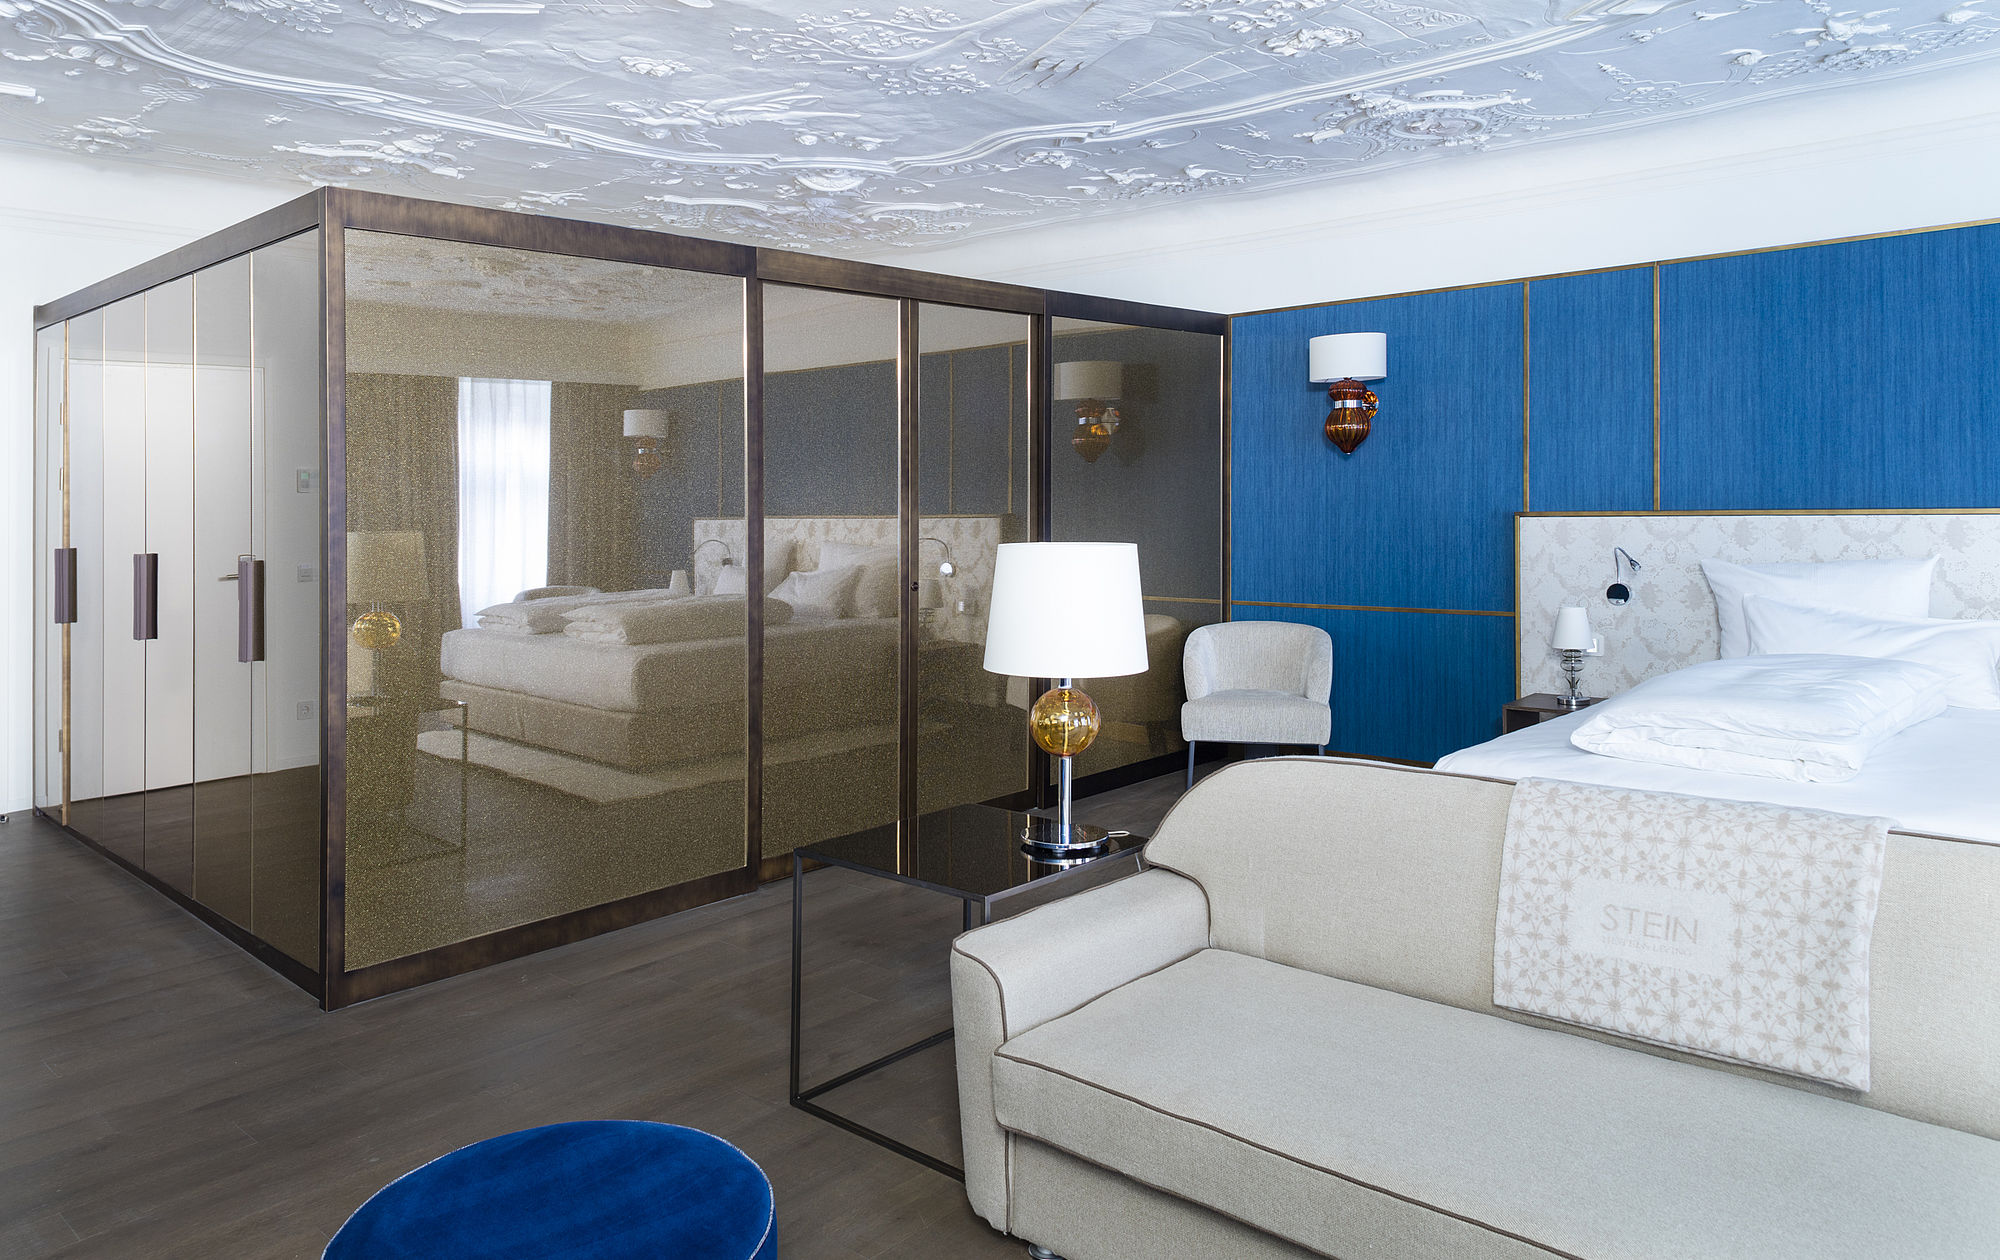 Hotel Stein honeymoon suite with stucco ceiling, king-size bed in front of blue wall, beige sofa and spacious metal wardrobe 